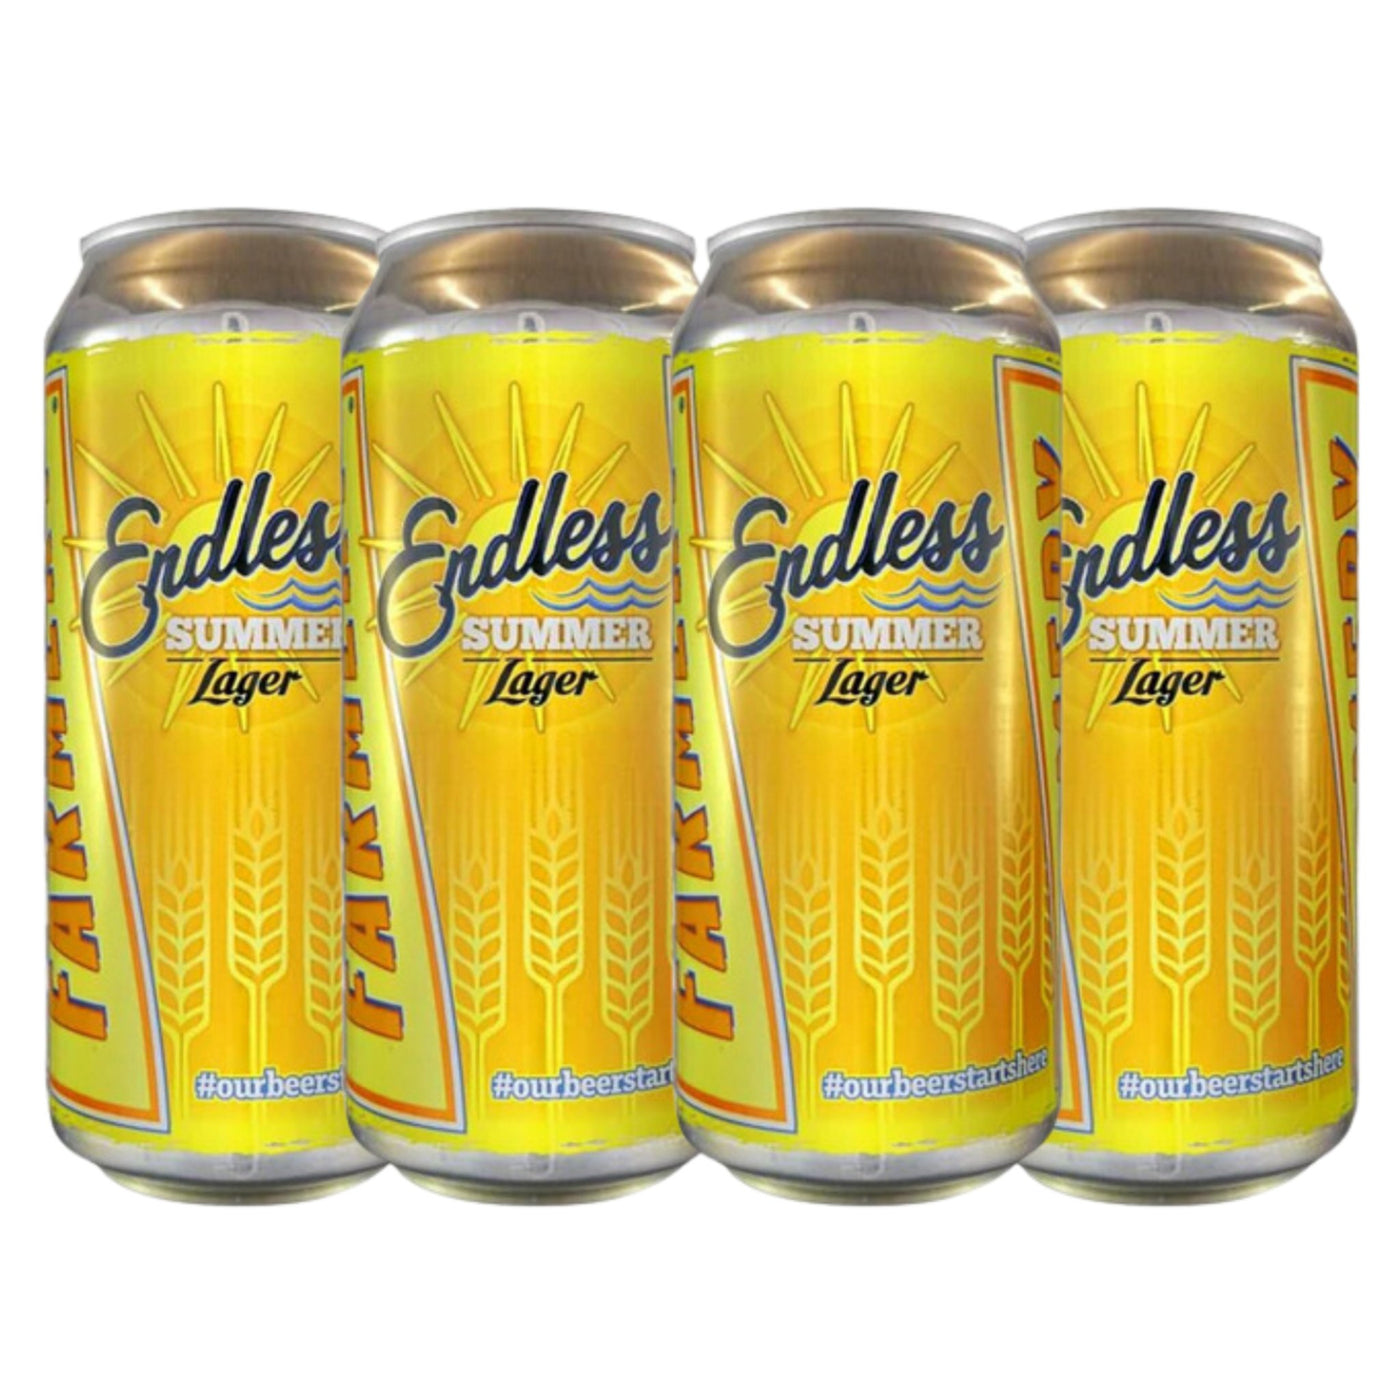 Endless Summer Lager - Farmery Estate Brewing Company Inc.-Core Beers